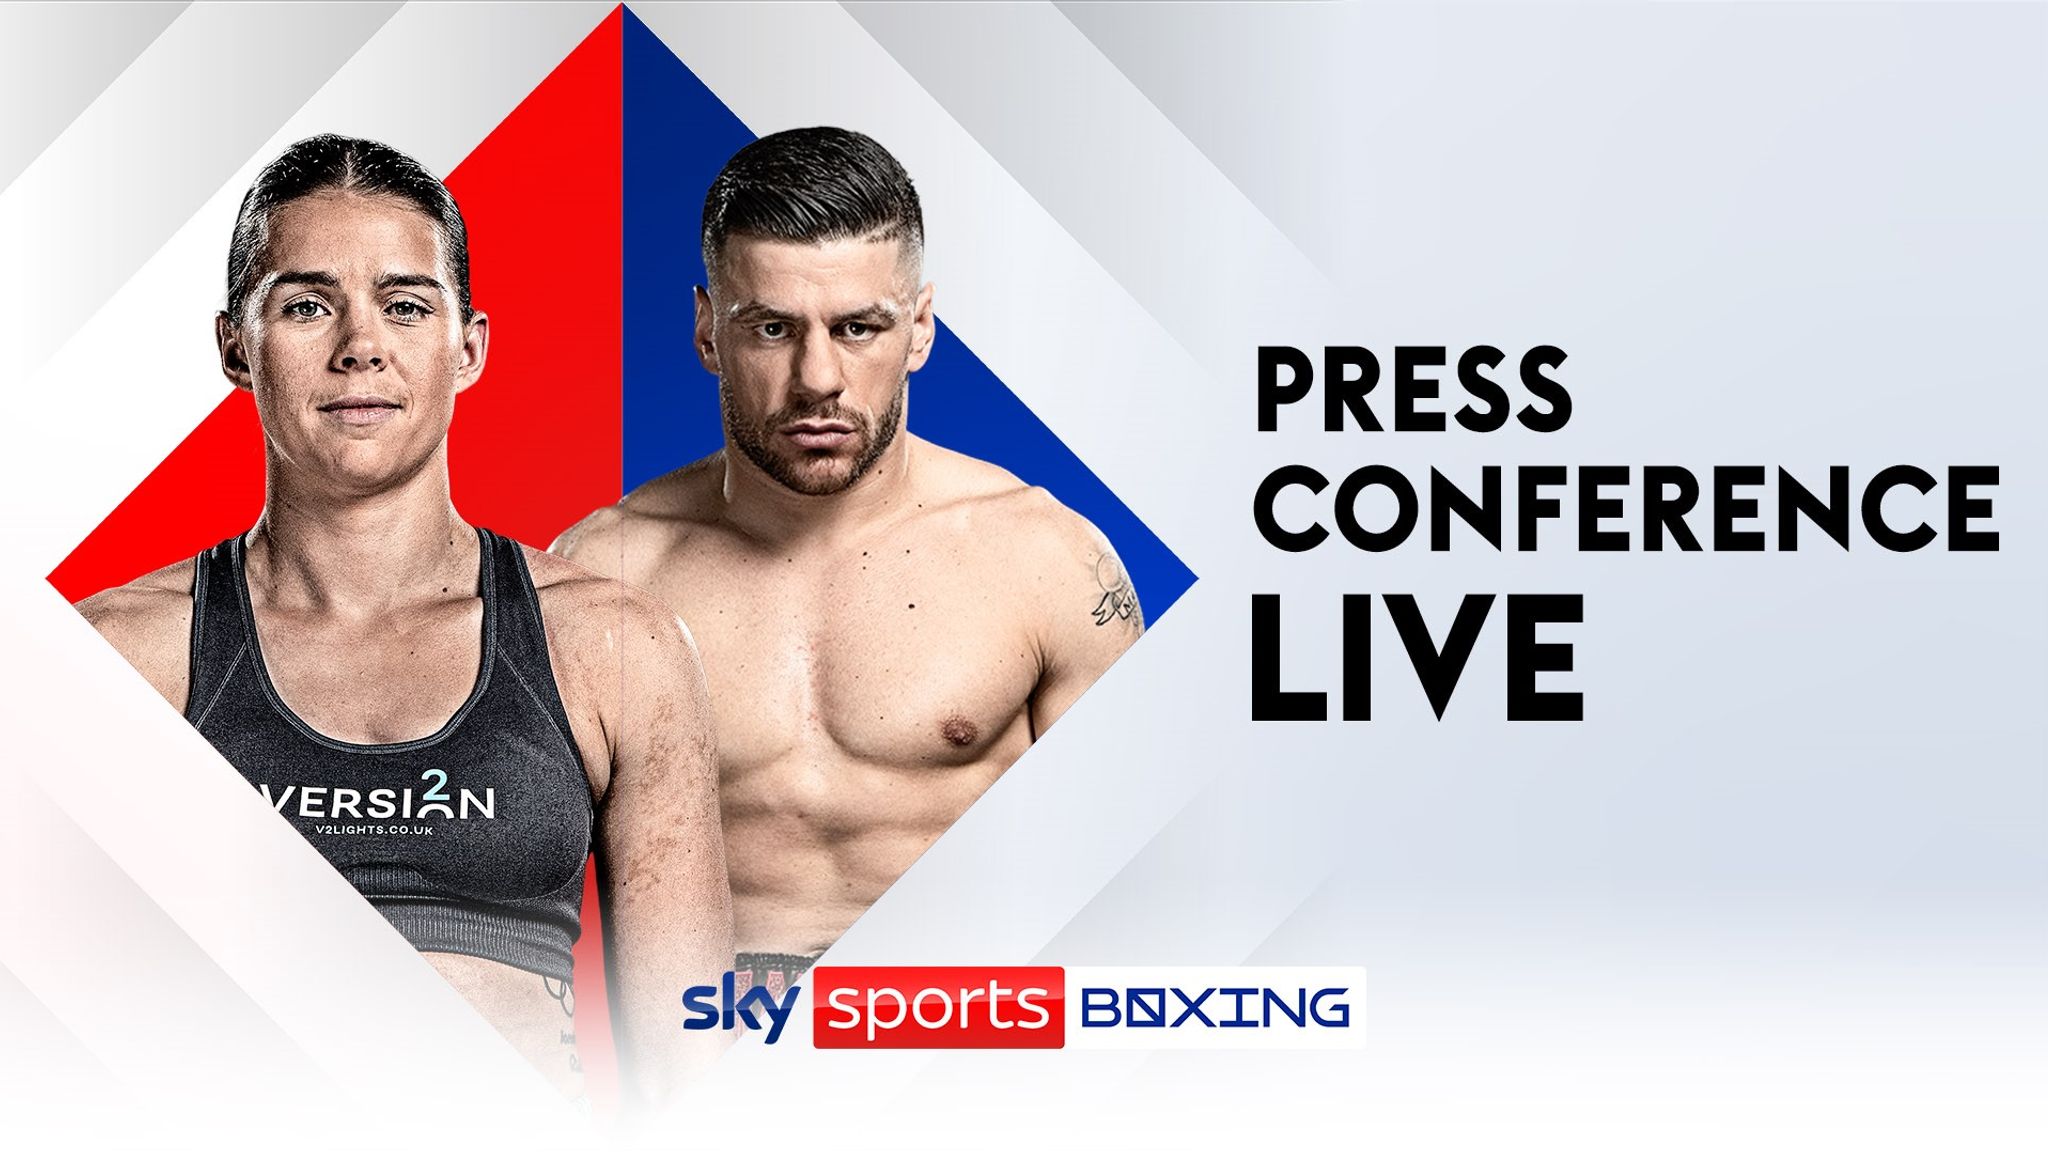 Savannah Marshall vs Femke Hermans Watch free live stream of the press conference featuring Florian Marku Boxing News Sky Sports